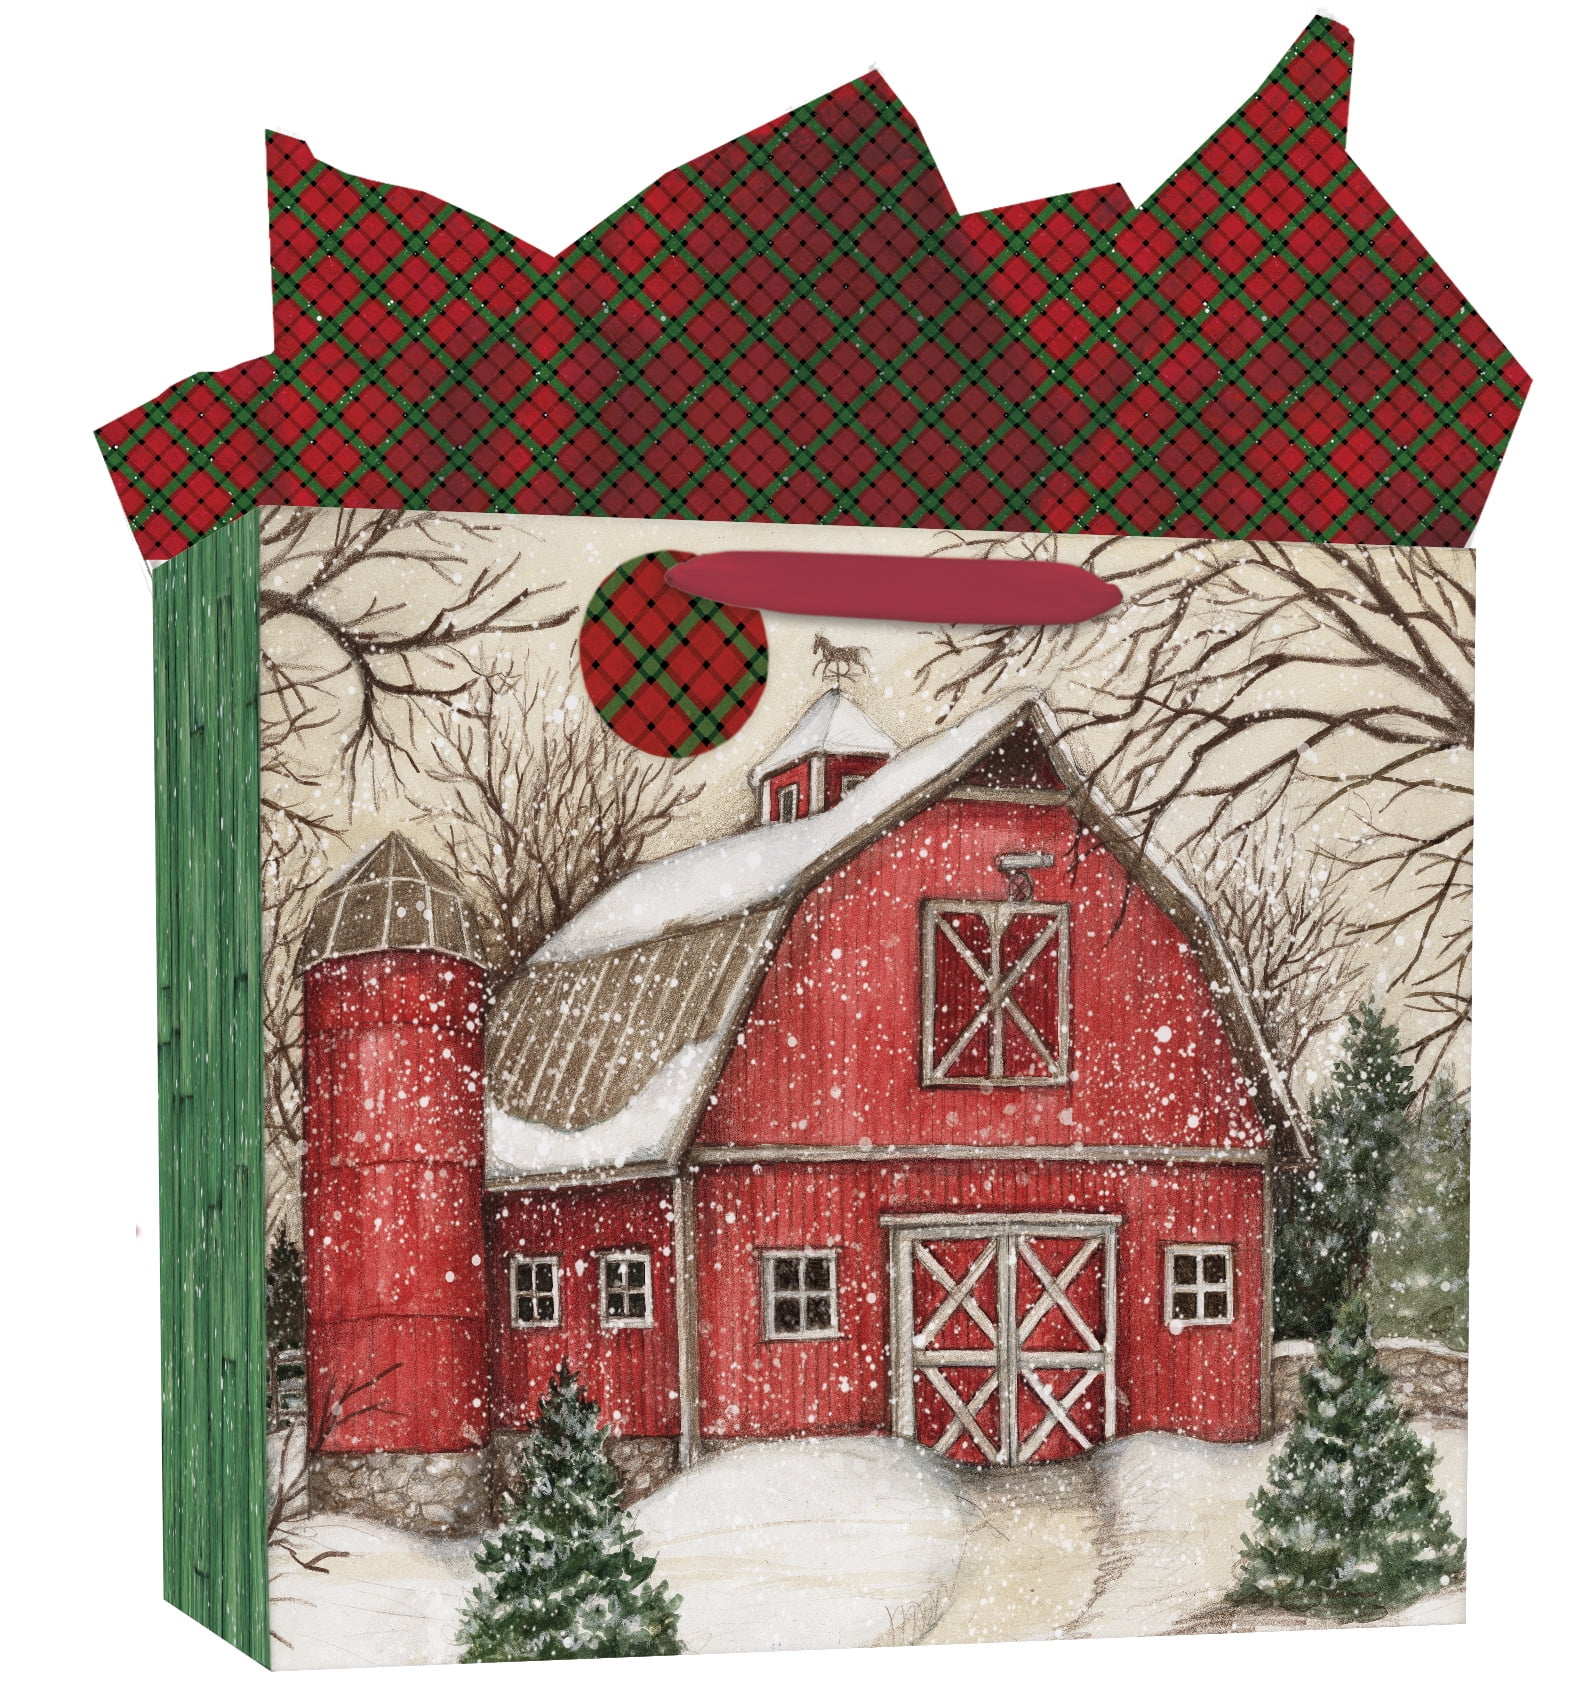 Snowy Friends Super Giant Christmas Gift Bag Tag Tie 44 x 56 Plastic Sack 